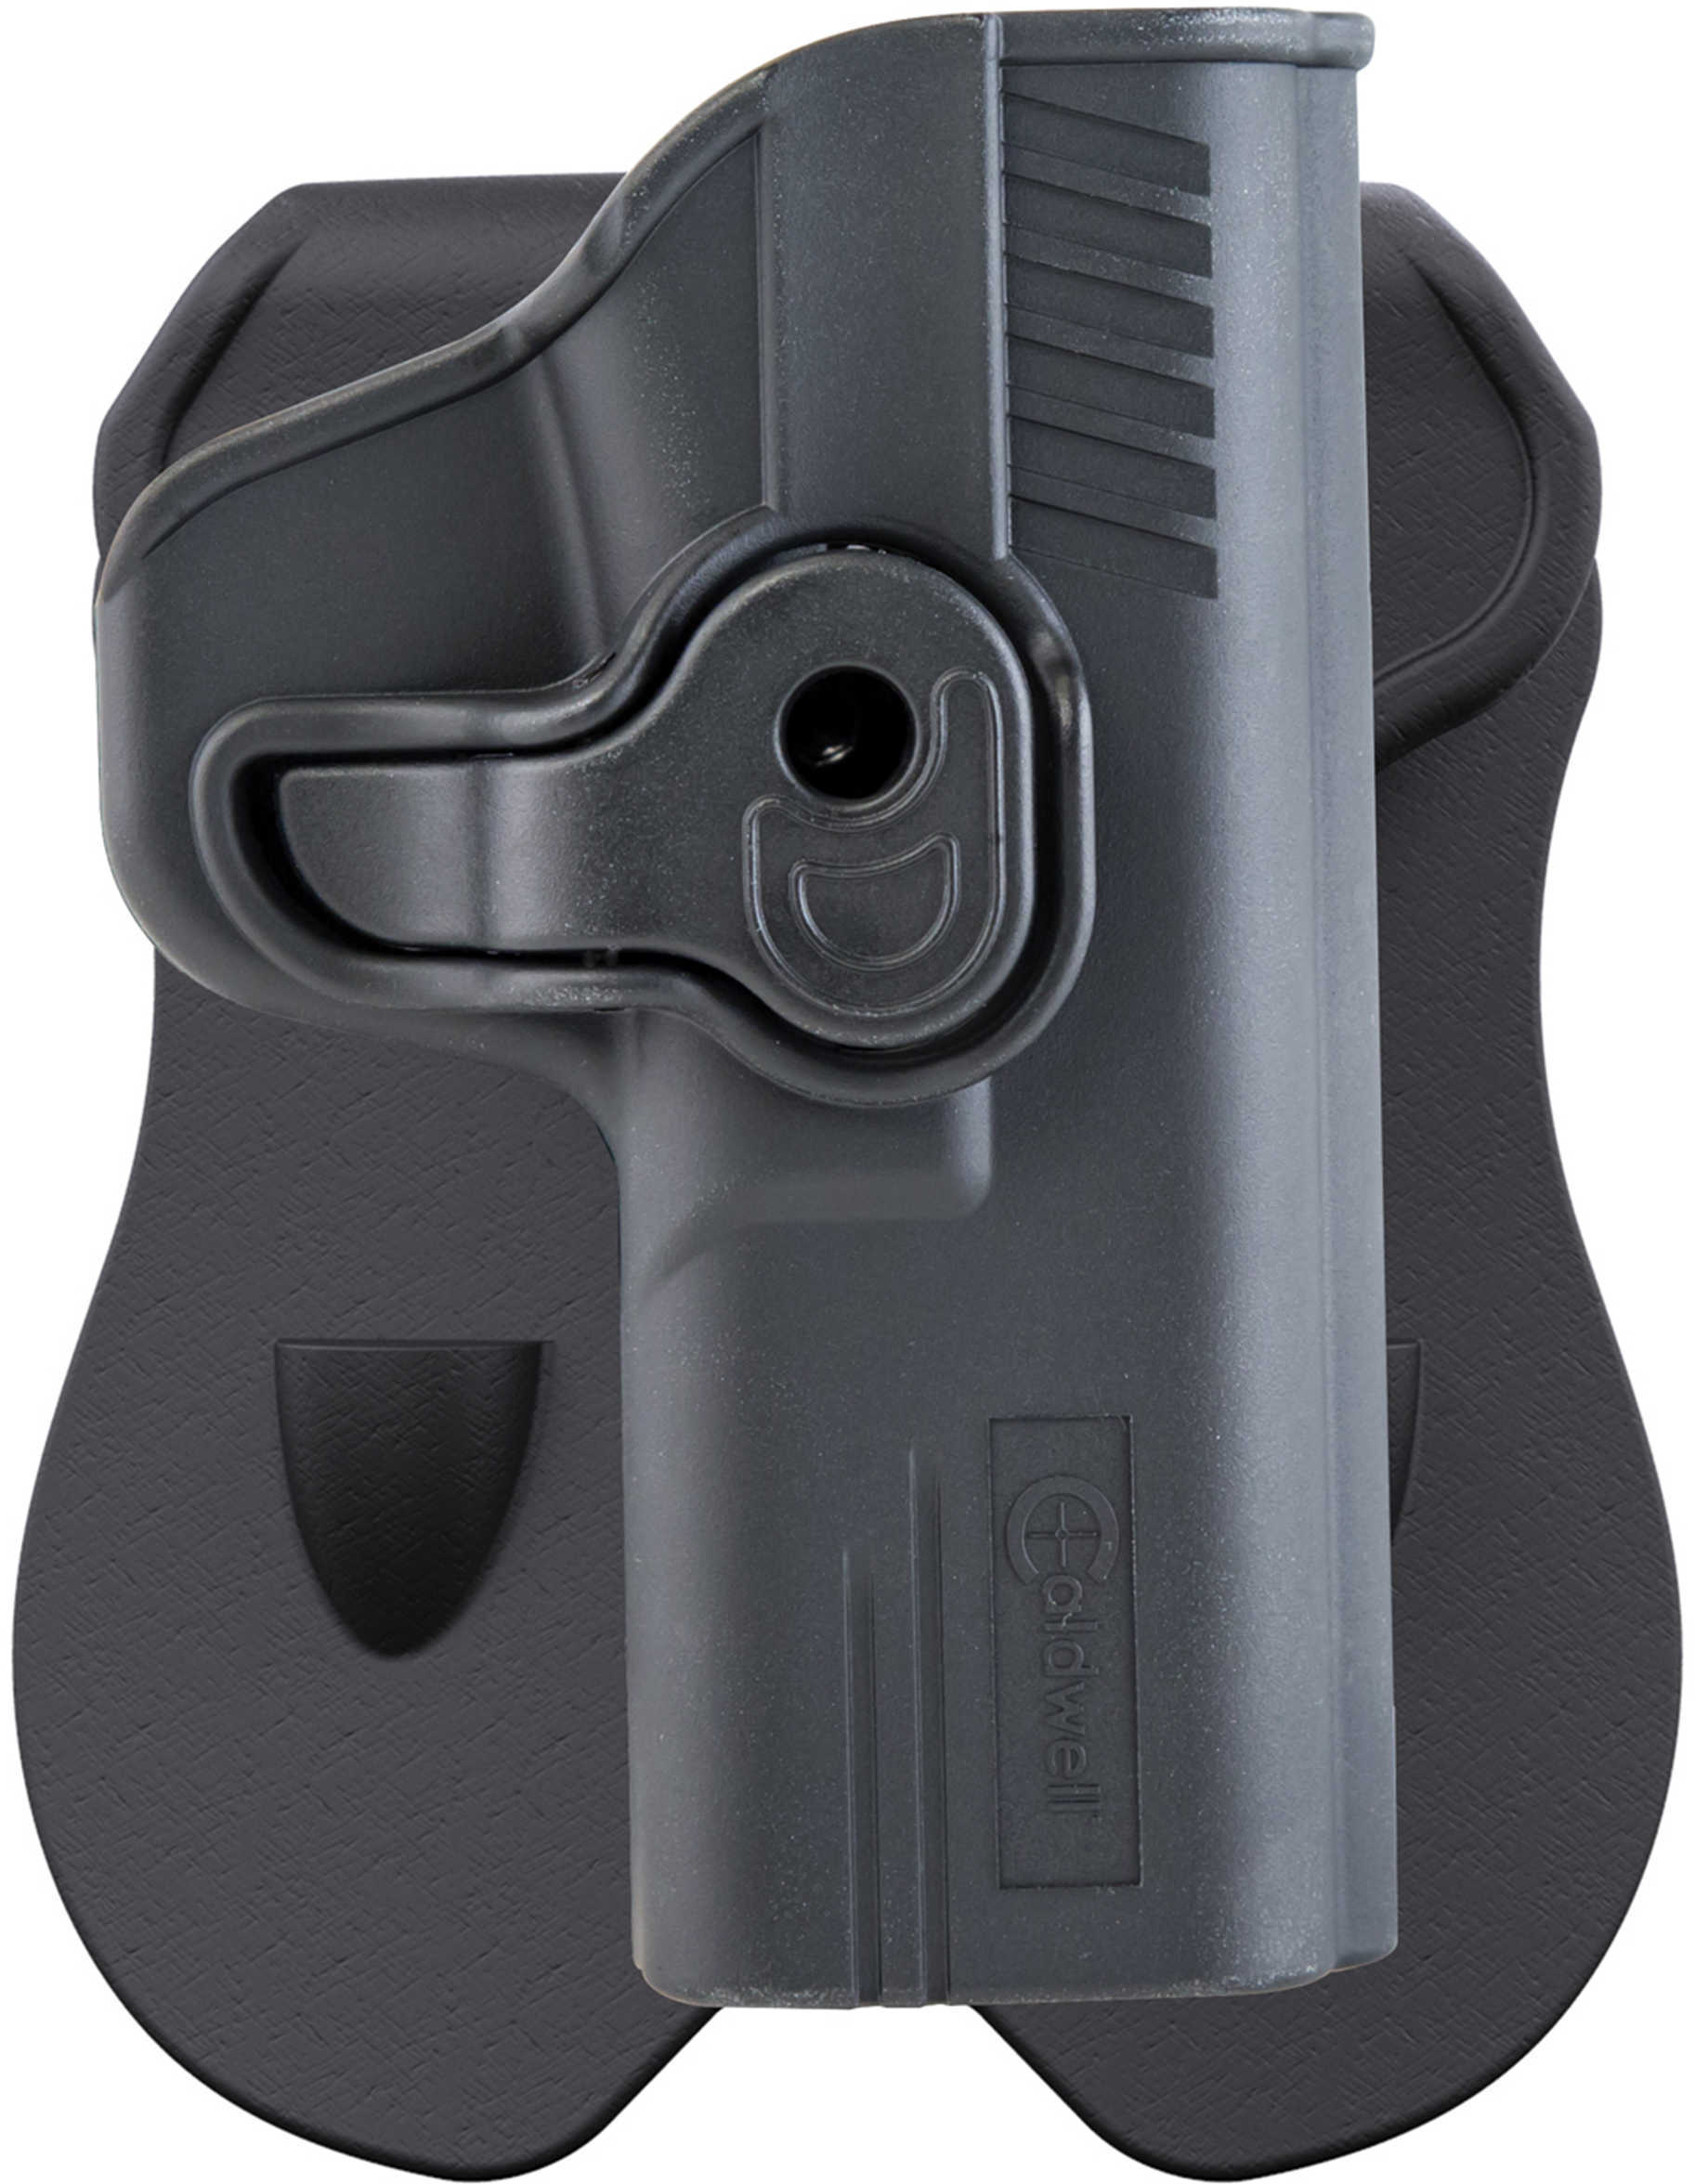 Caldwell Tac Ops Holster for Glock 19, 23, and 32, Right Hand, Black Md: 110053